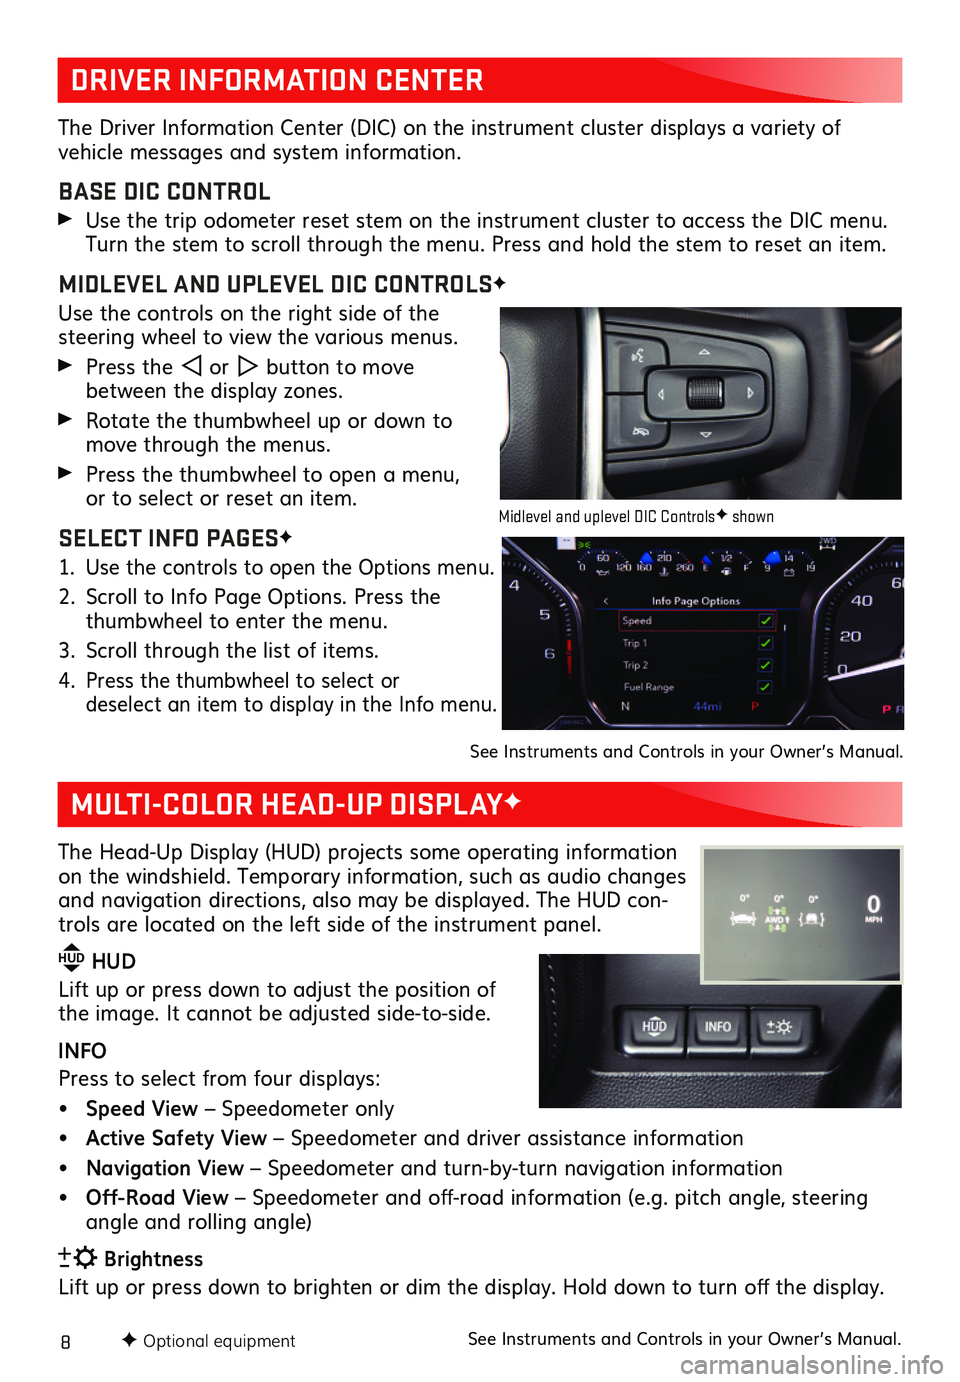 GMC SIERRA 2019  Get To Know Guide 8F Optional equipment
DRIVER INFORMATION CENTER
MULTI-COLOR HEAD-UP DISPLAYF
The Driver Information Center (DIC) on the instrument cluster displays a variety of  
vehicle messages and system informati